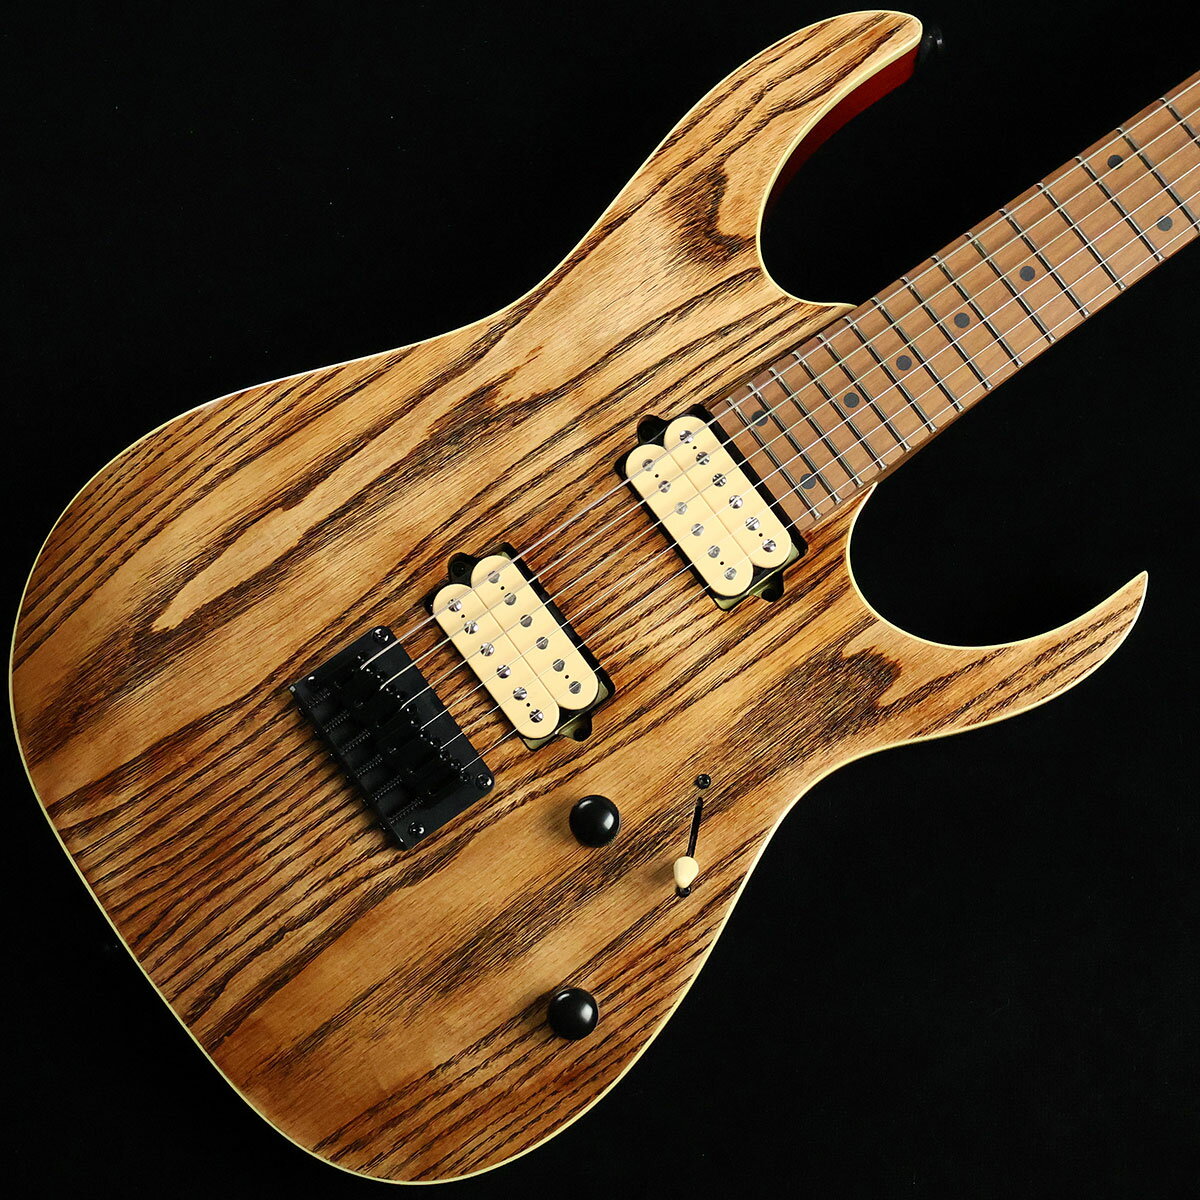 Ibanez RG421HPAM@Antique Brown Stained Low Gloss@S/NFI230808816 yYz ACoj[Y yWiz